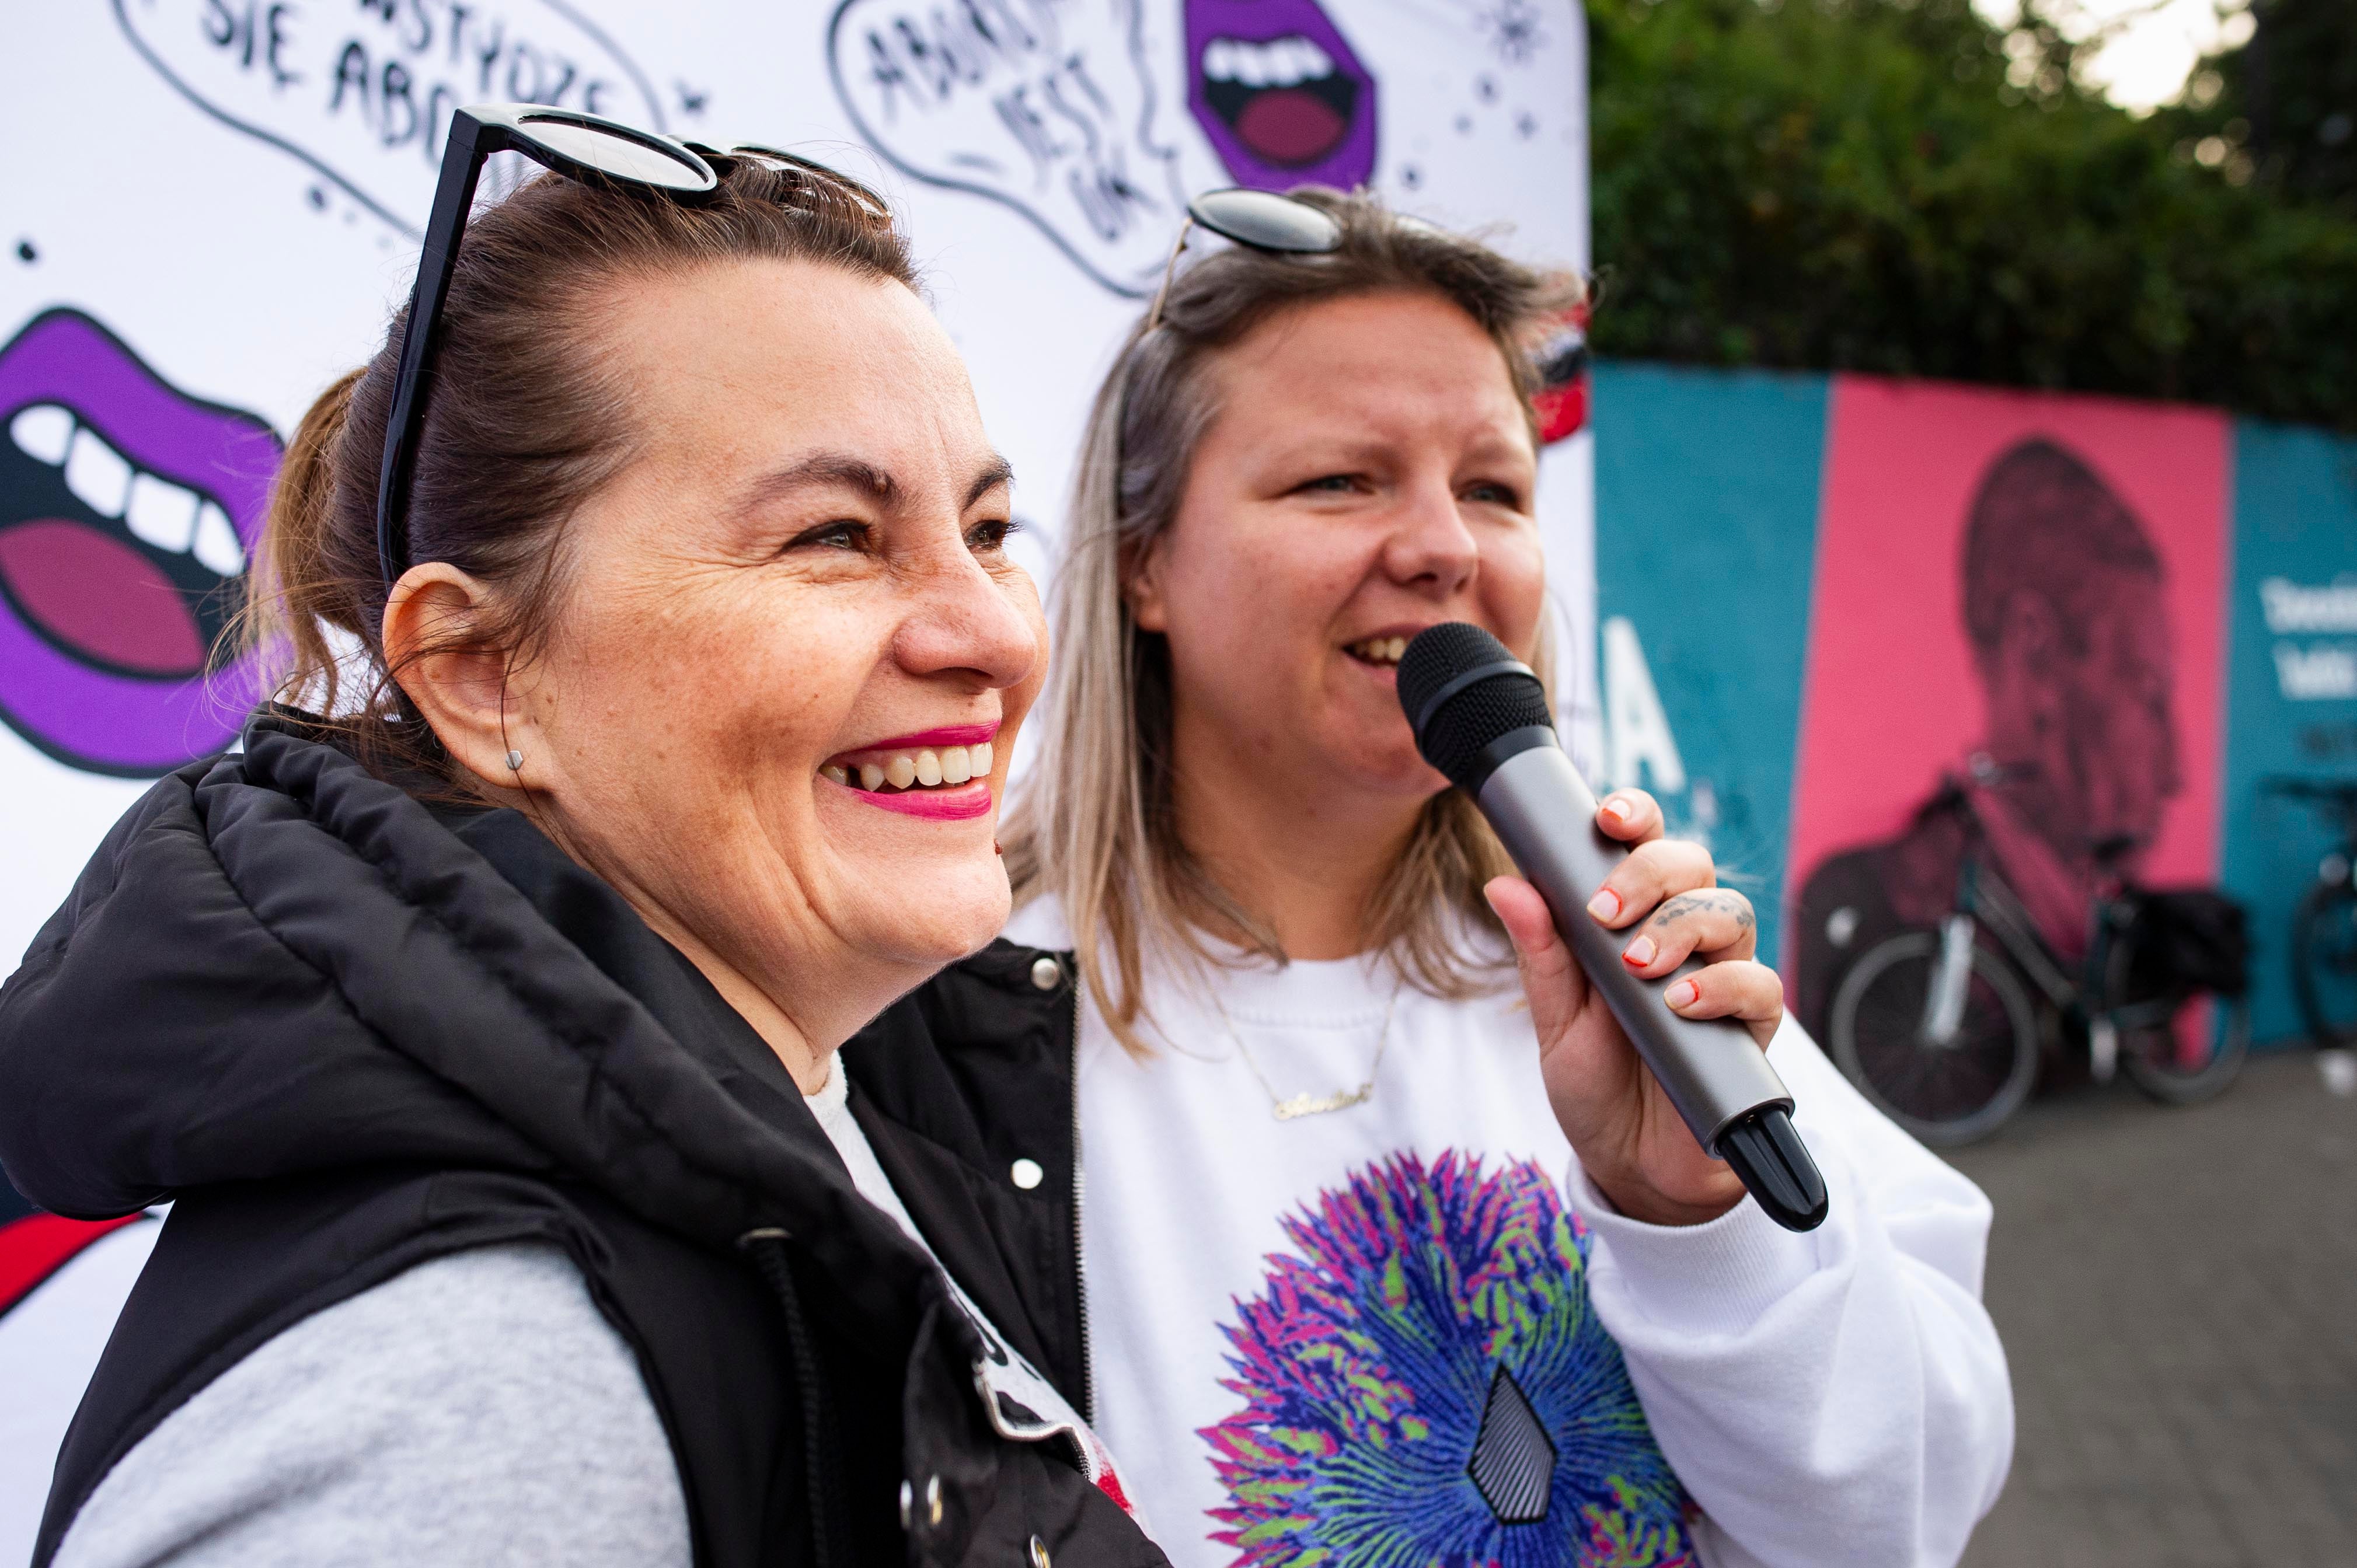 Justyna Wydrzyńska (left) and a colleague from the group Abortion Dream Team address a gathering in Warsaw city center to share the experiences of people who needed abortions, September 28, 2021.